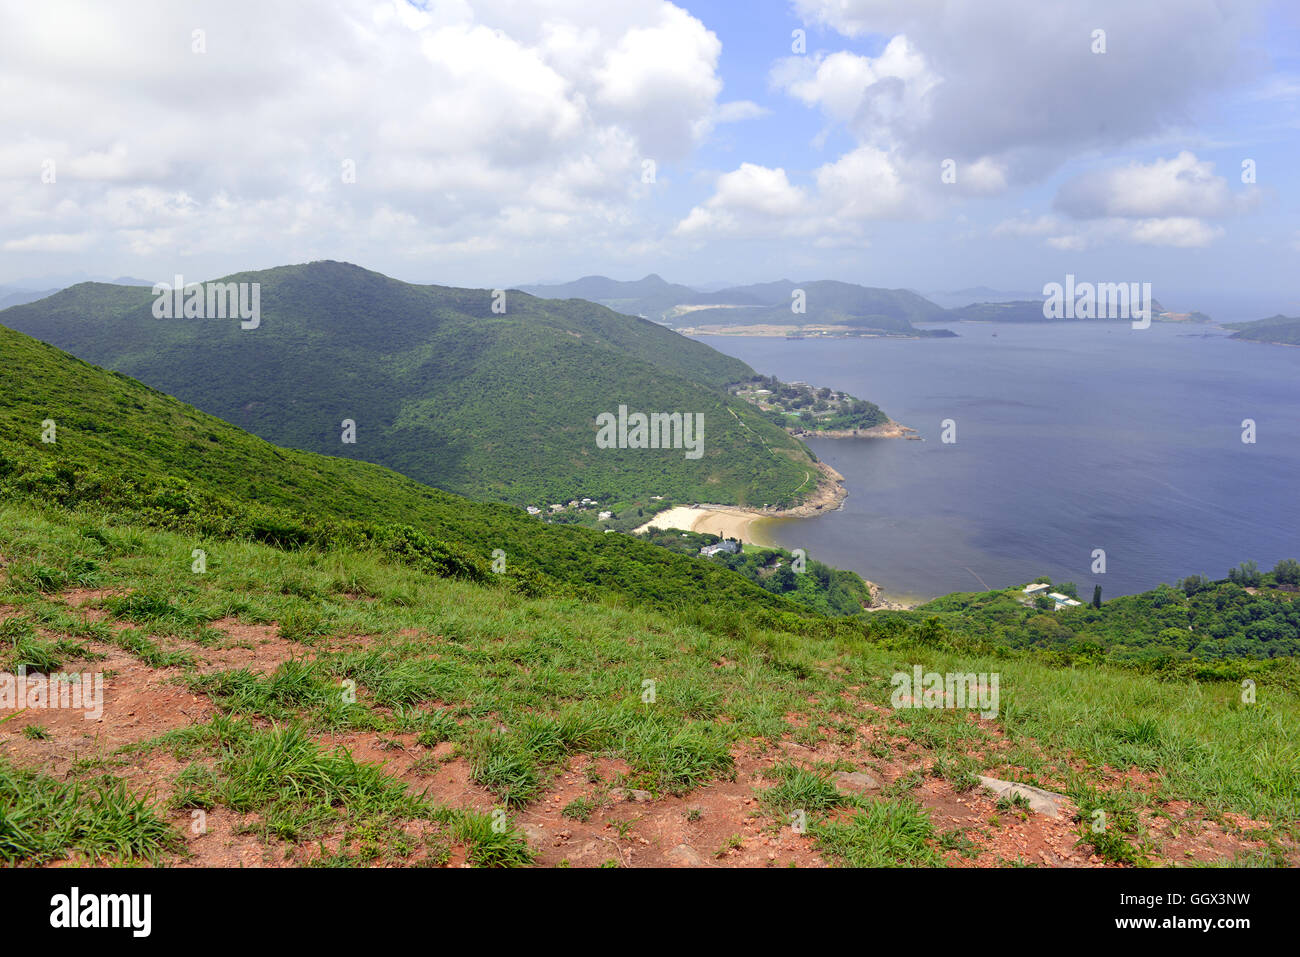 Green Tropical mountains and hiking route on the Dragon's Back trail near Hong Kong Stock Photo